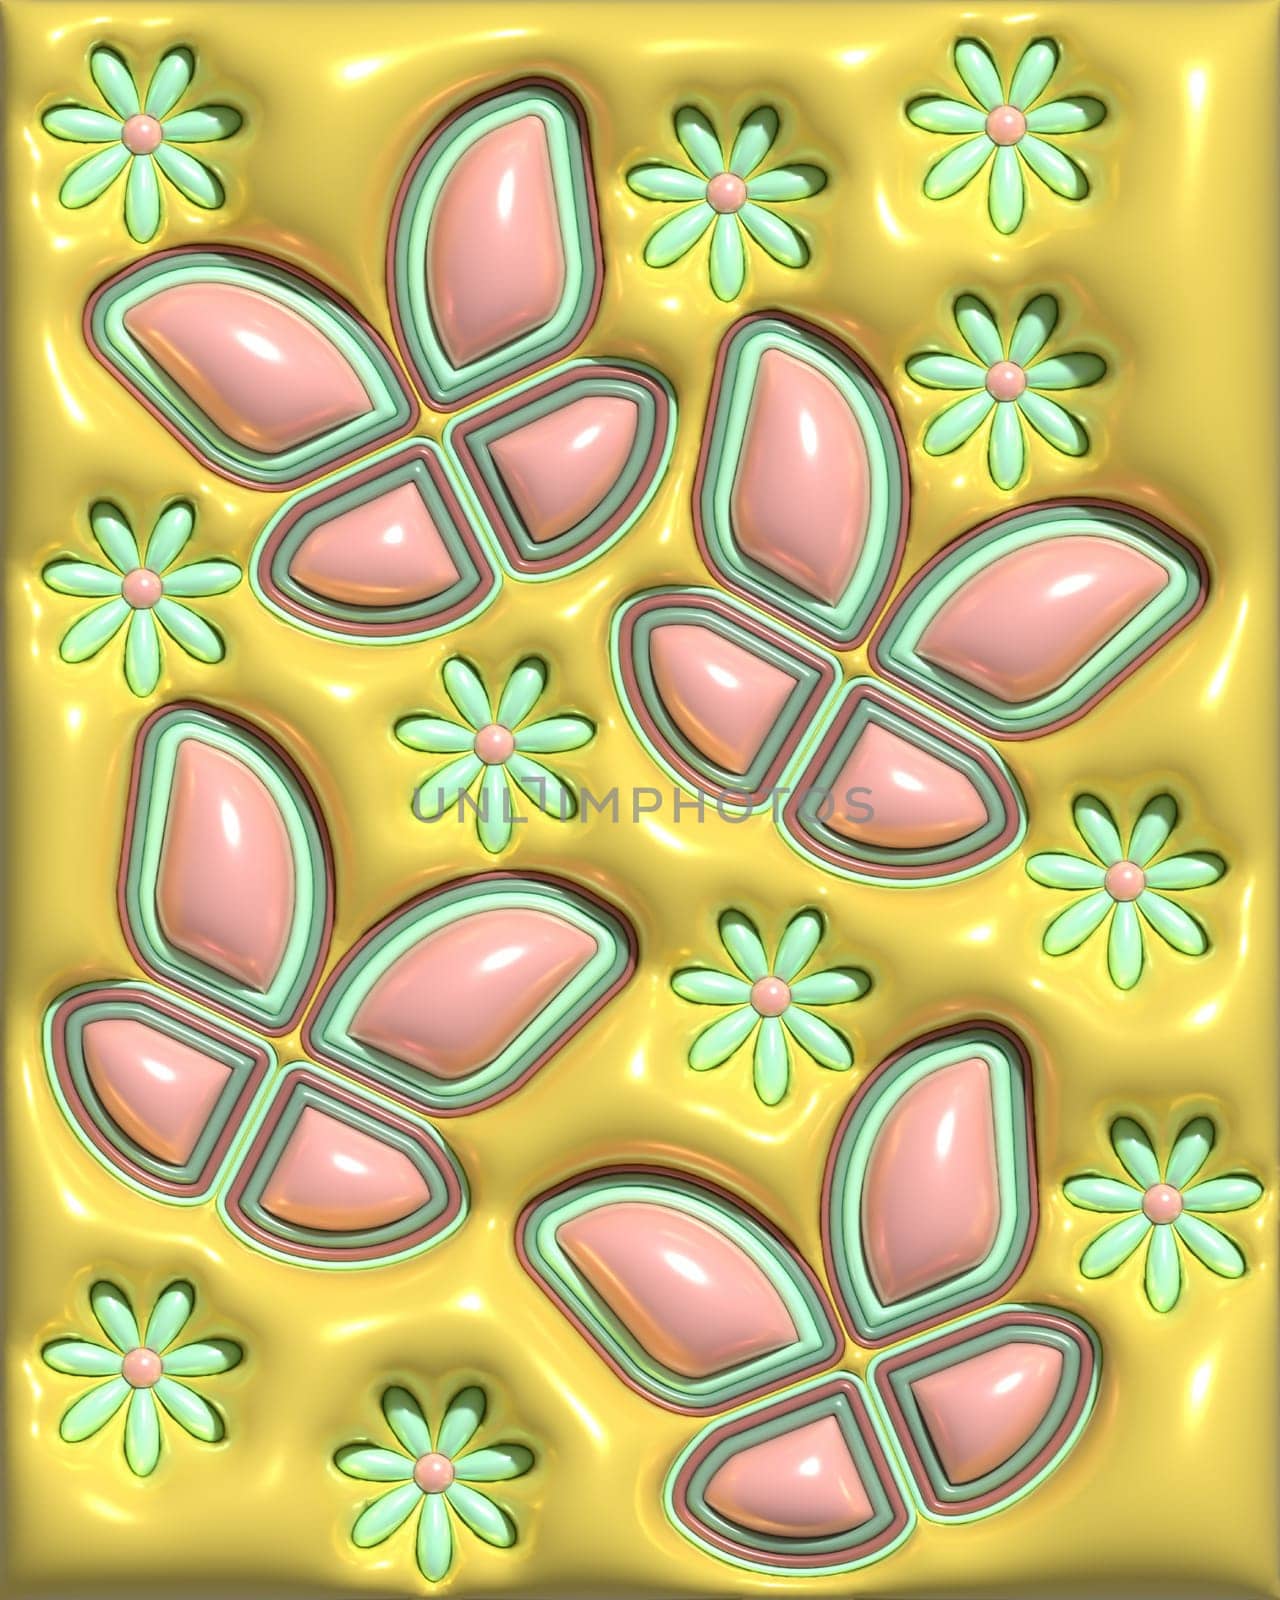 Butterflies and flowers on a yellow background, 3D rendering illustration by ndanko